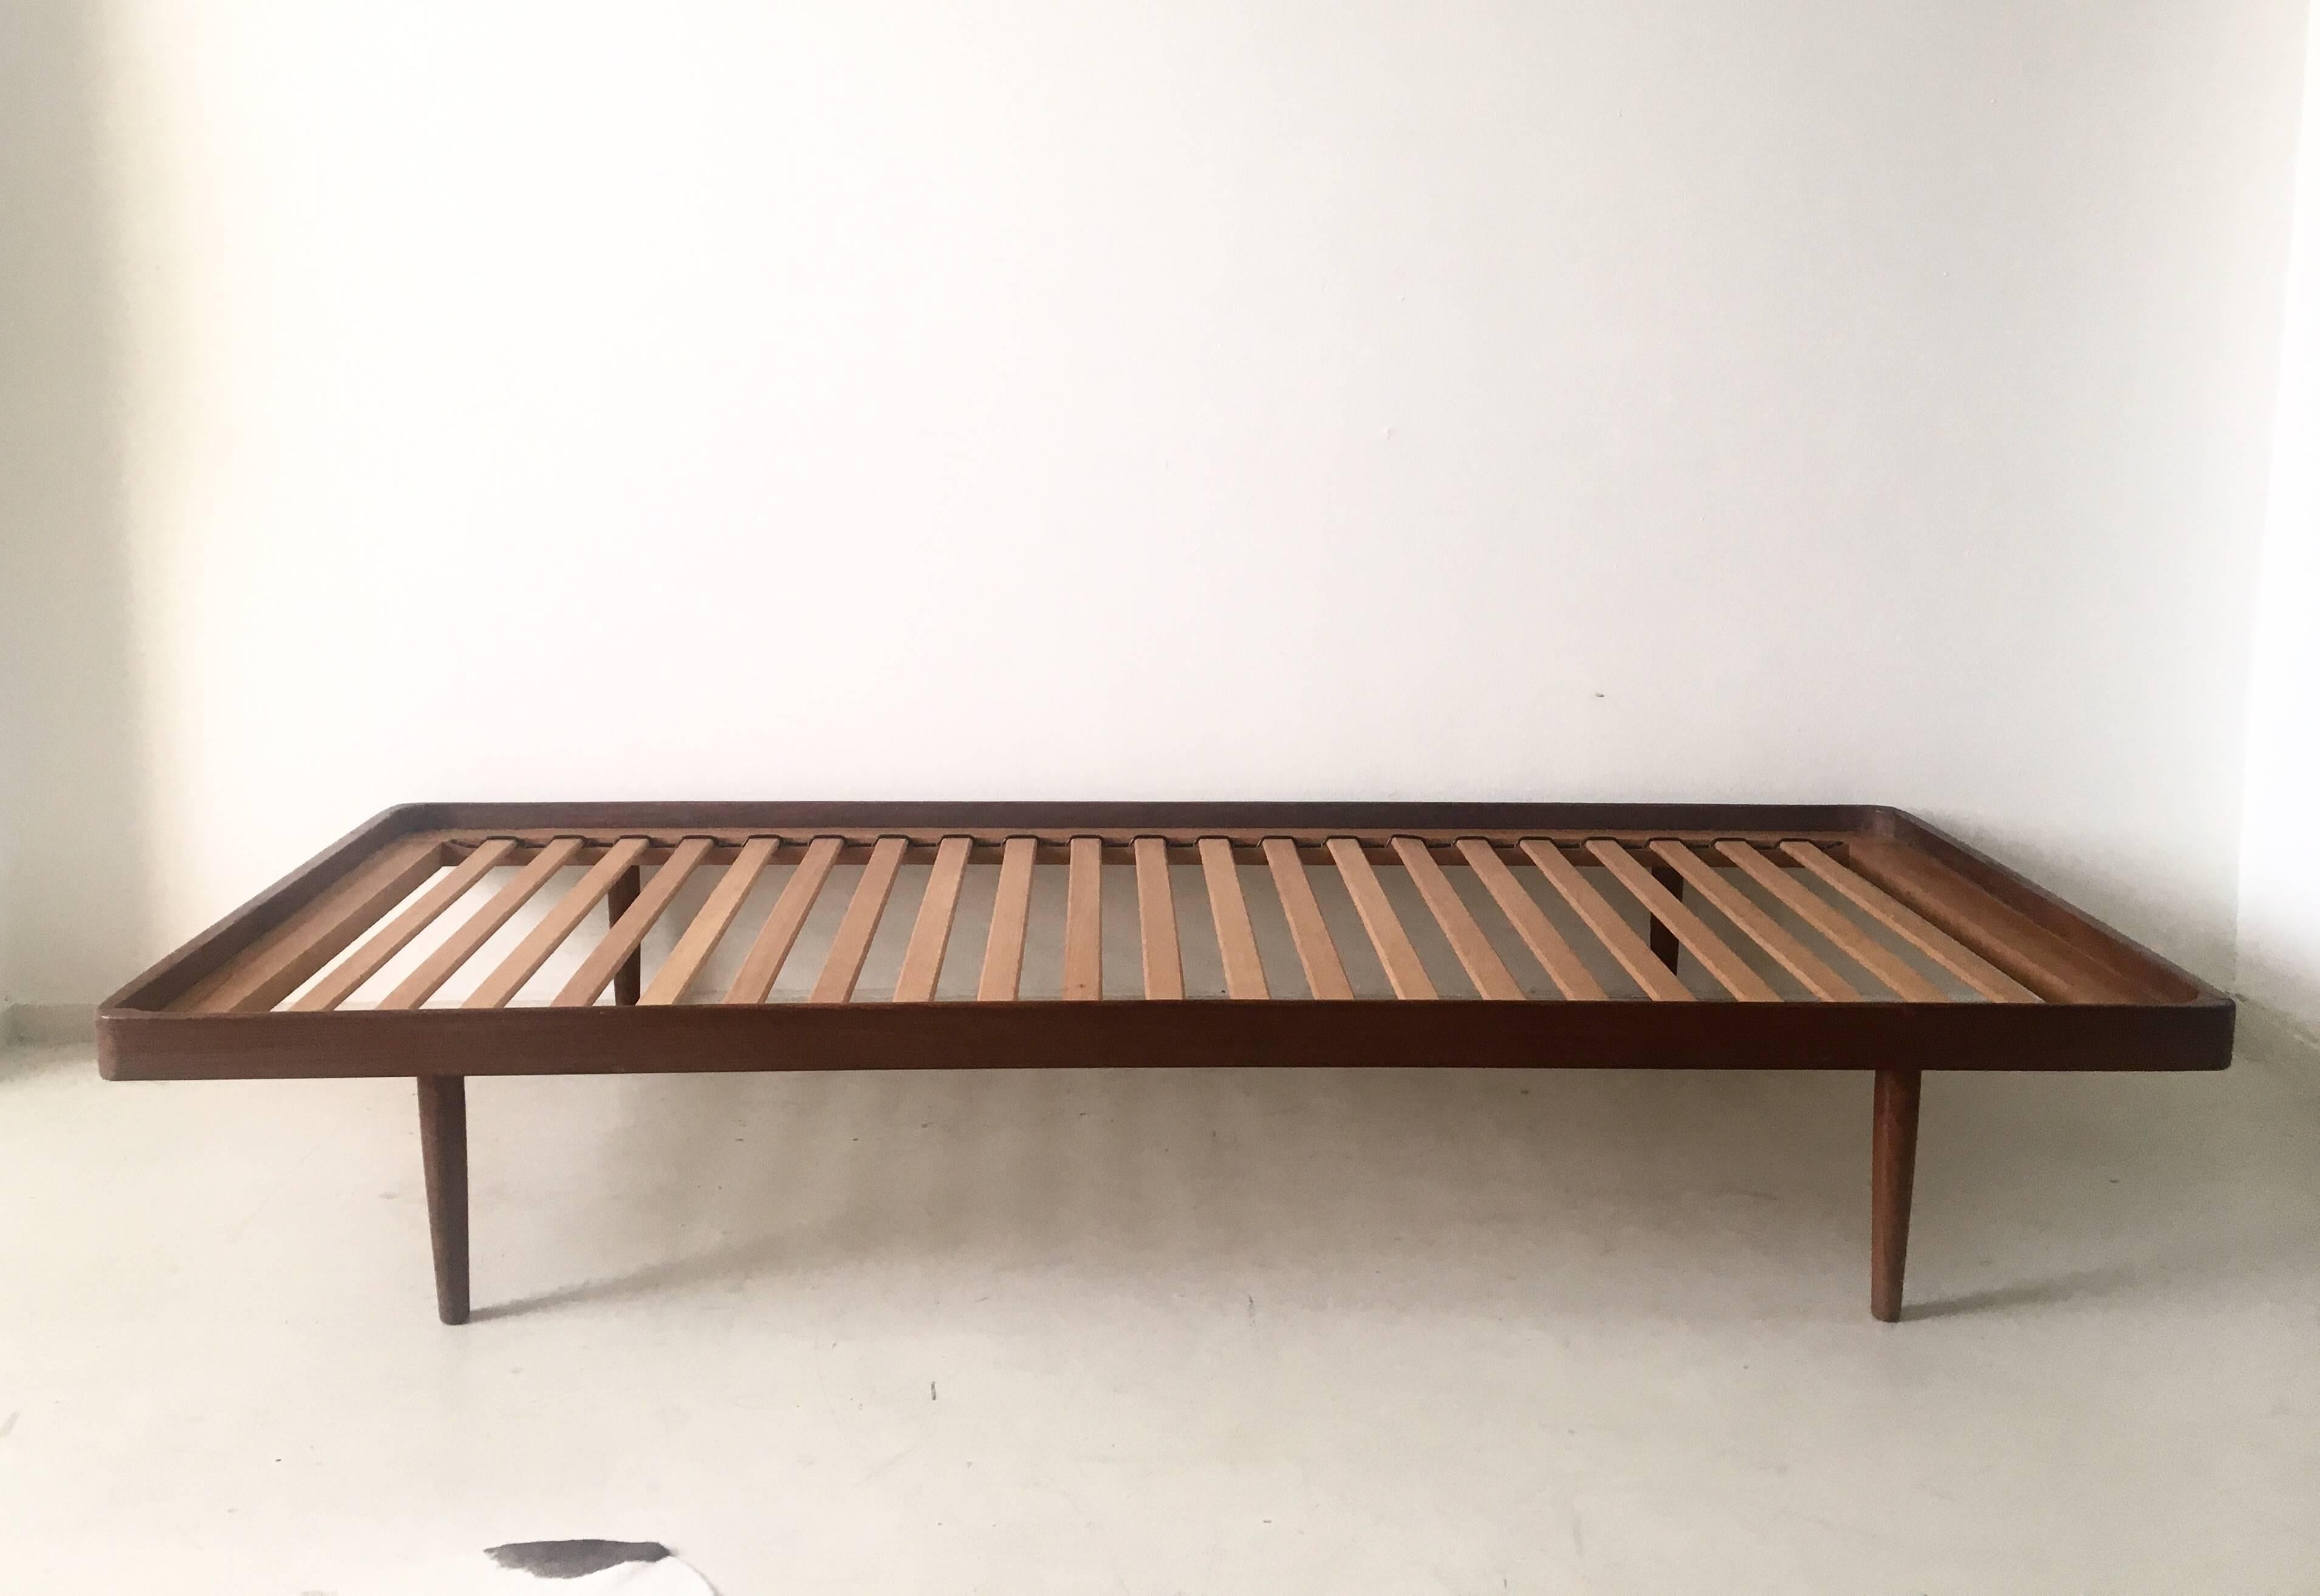 Wonderful daybed that was designed and manufactured in The Netherlands, circa the 1960s. It features a teak frame and an Ochre colored mattress.

This piece remains in good vintage condition with some wear, consistent with age and use. One small